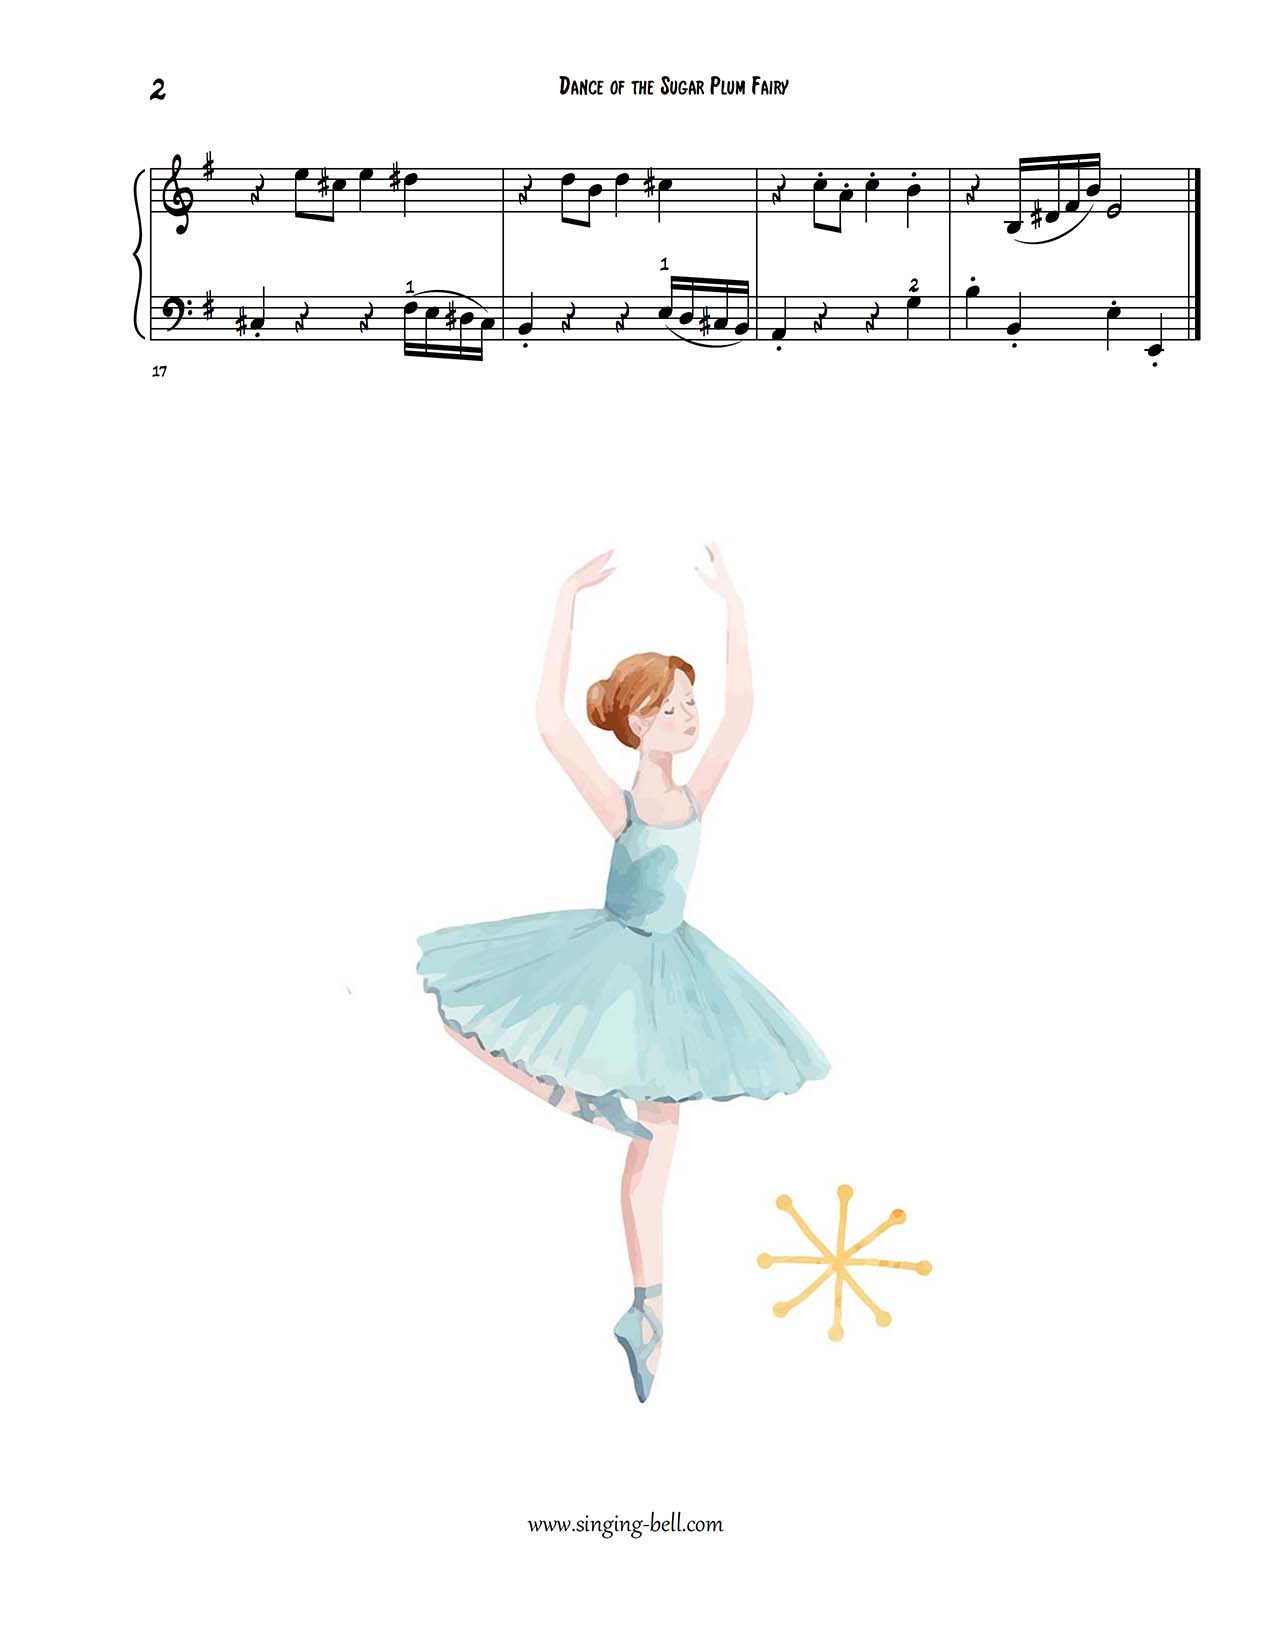 Dance of the Sugar Plum Fairy easy piano sheet music p.2 notes beginners pdf